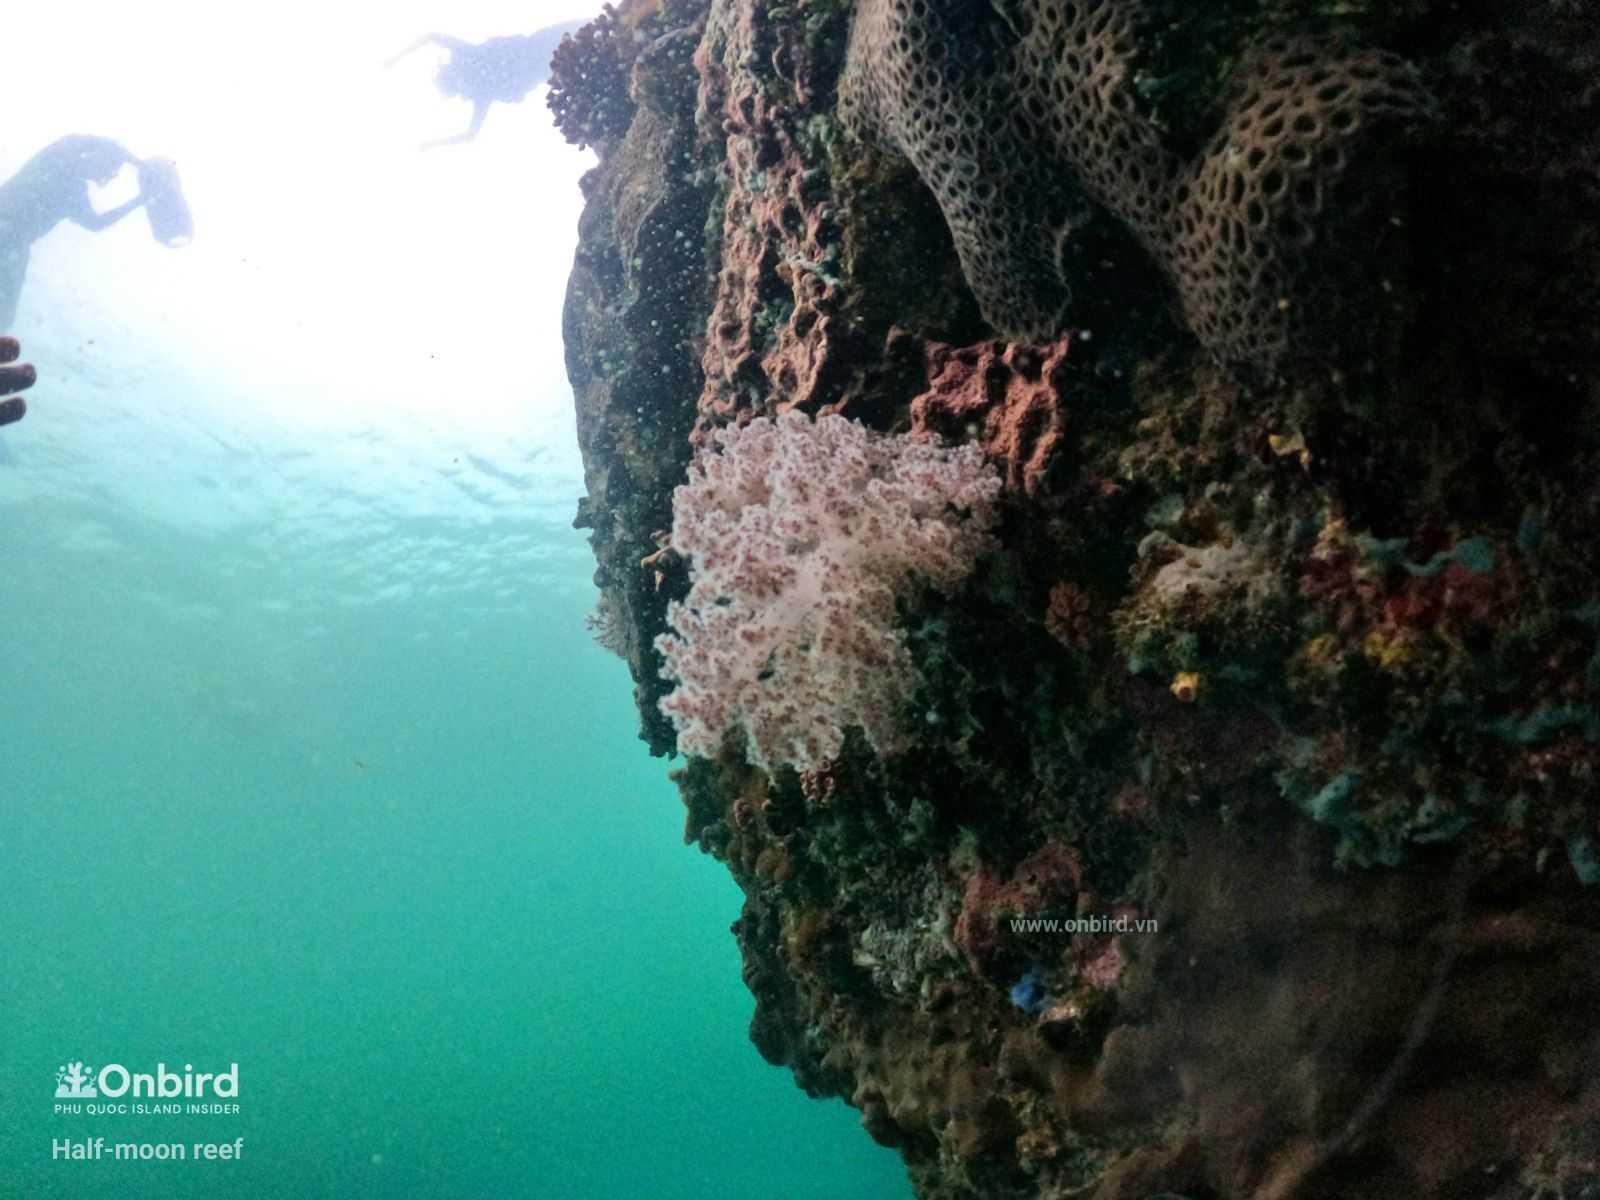 Finger Leather Coral(Sinularia or Nepthea Coral) in Phu Quoc Island, Vietnam